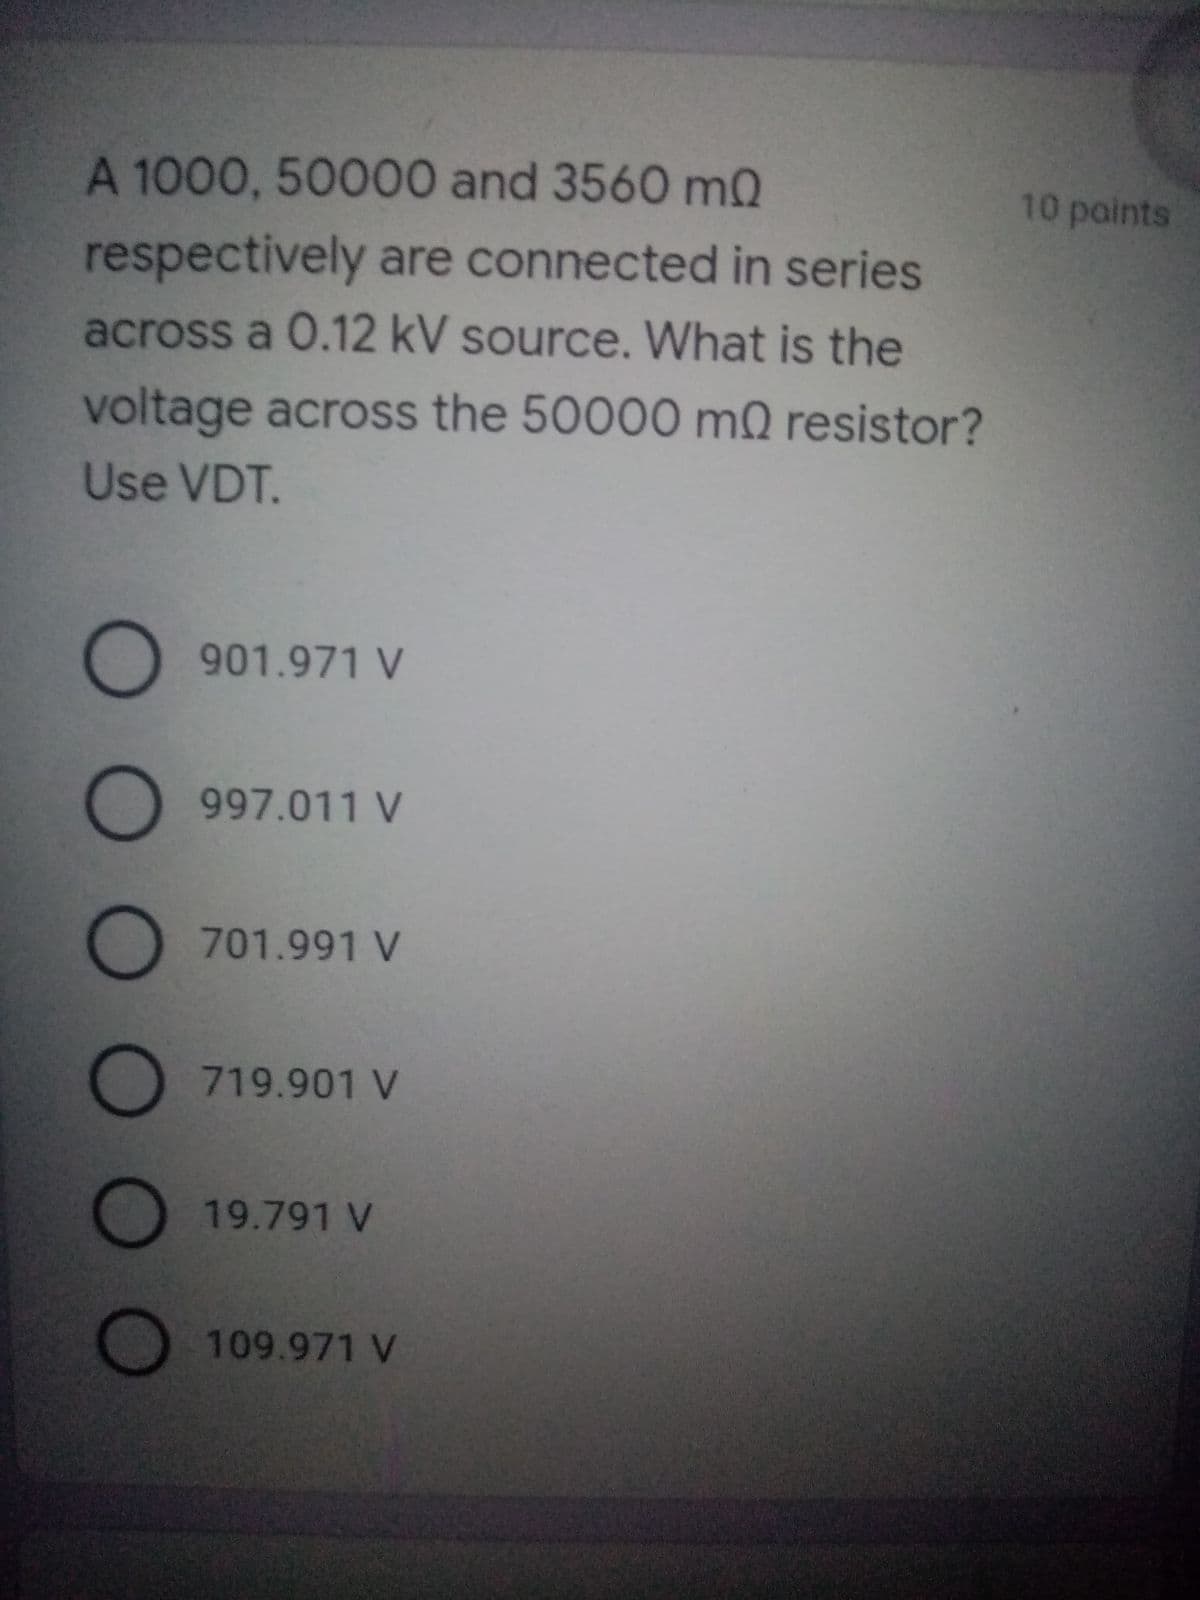 A 1000, 50000 and 3560 mQ
10 paints
respectively are connected in series
across a 0.12 kV source. What is the
voltage across the 50000 mQ resistor?
Use VDT.
901.971 V
997.011 V
701.991 V
O 719.901 V
19.791 V
O 109.971 V
O O O O O
